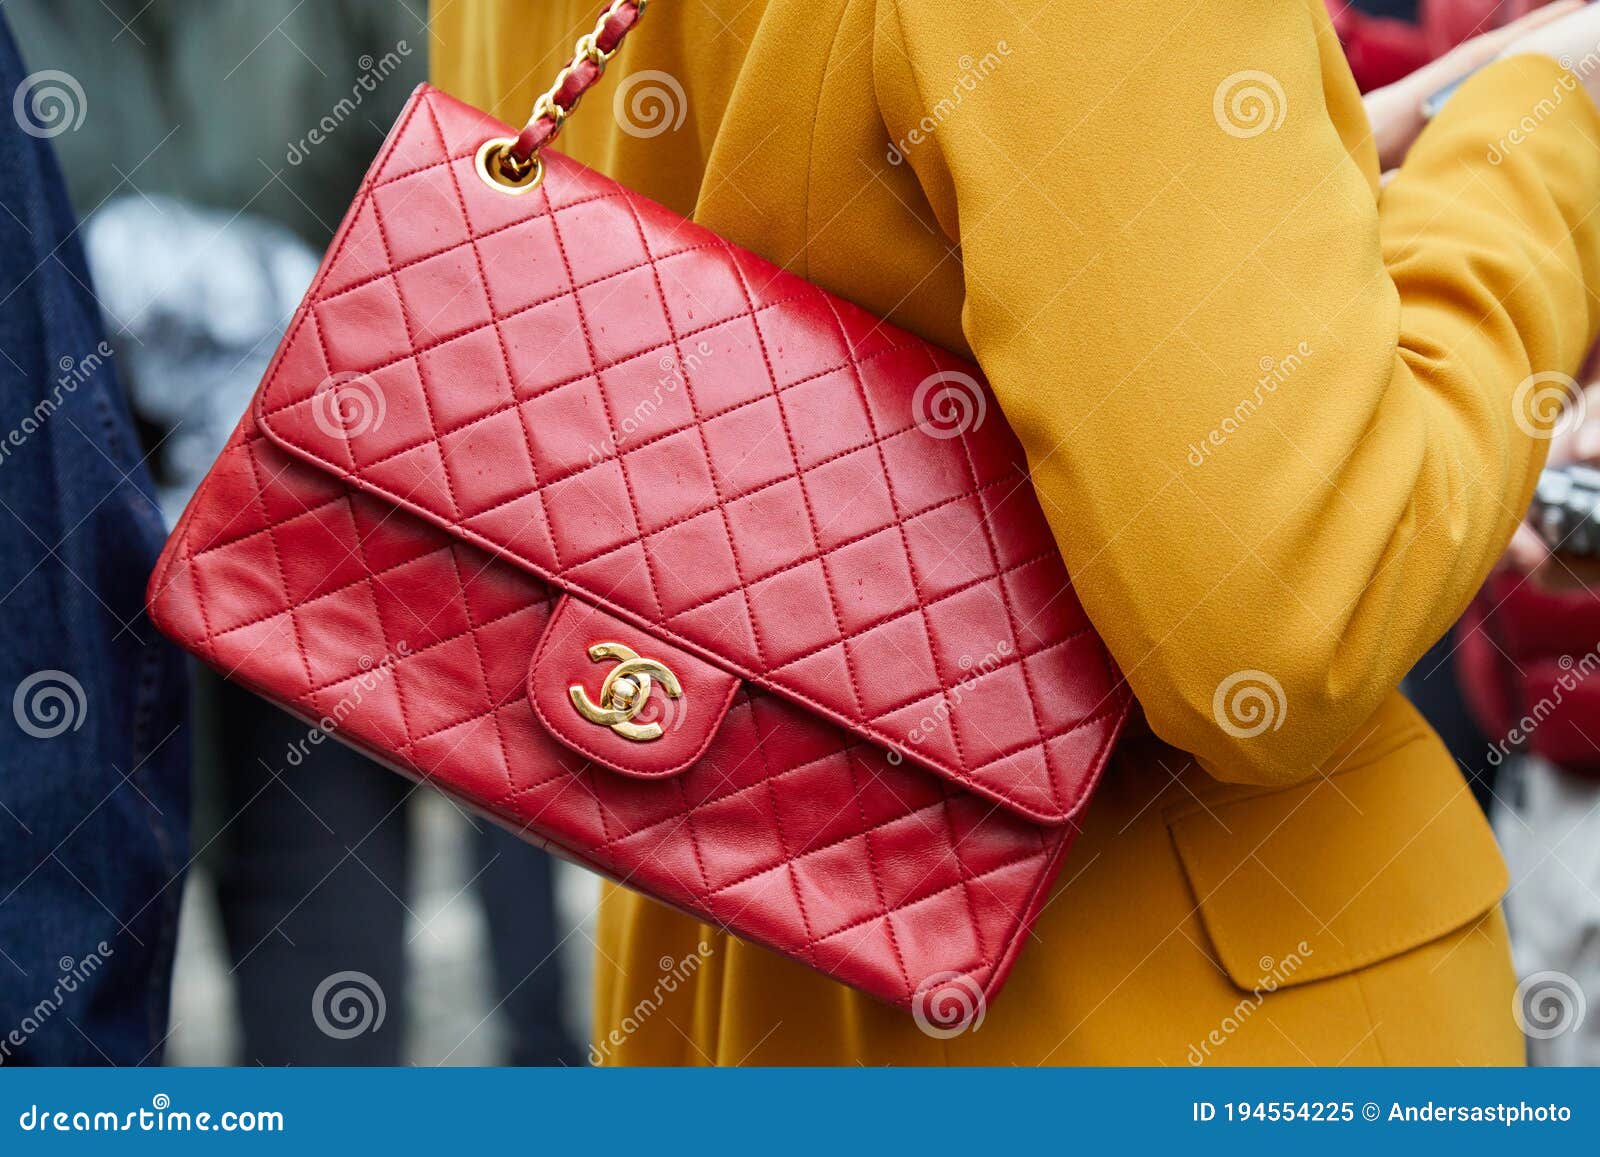 Woman with Red Chanel Leather Bag and Yellow Jacket before Max Mara Fashion  Show, Milan Fashion Week Street Editorial Image - Image of show, golden:  194554225